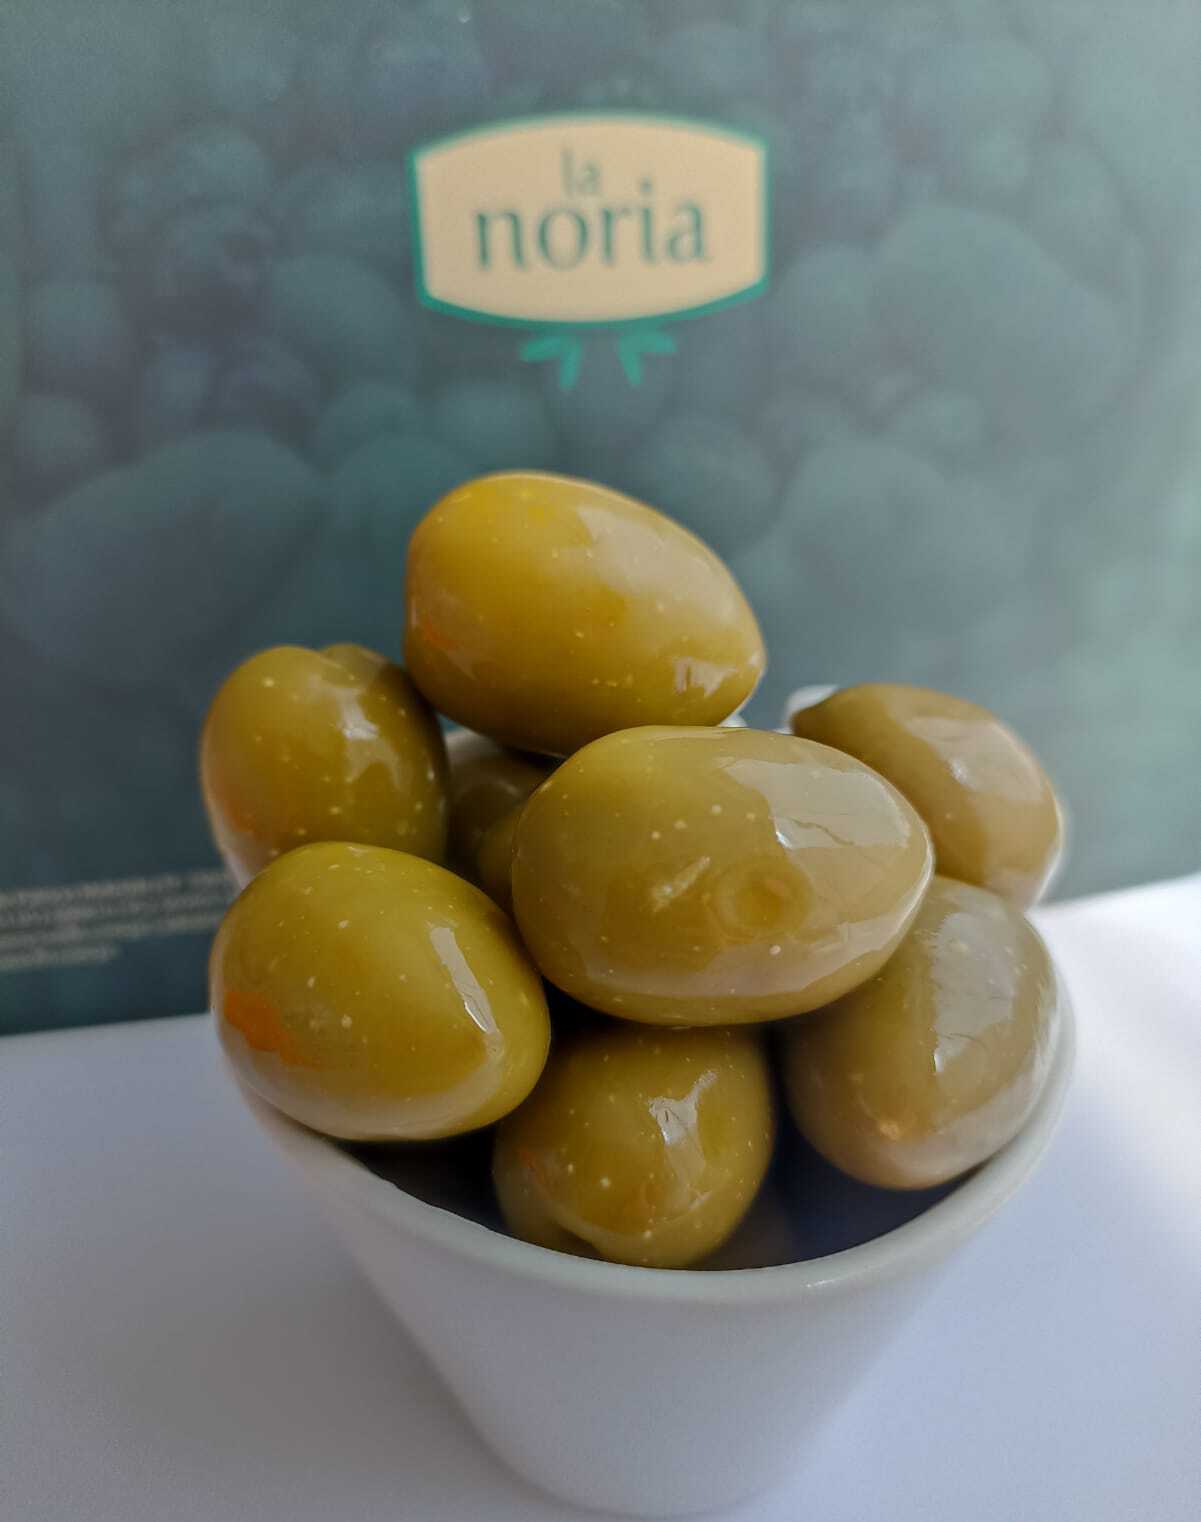 WHOLE GREEN OLIVES VARIETY ASCOLANA IN BRINE